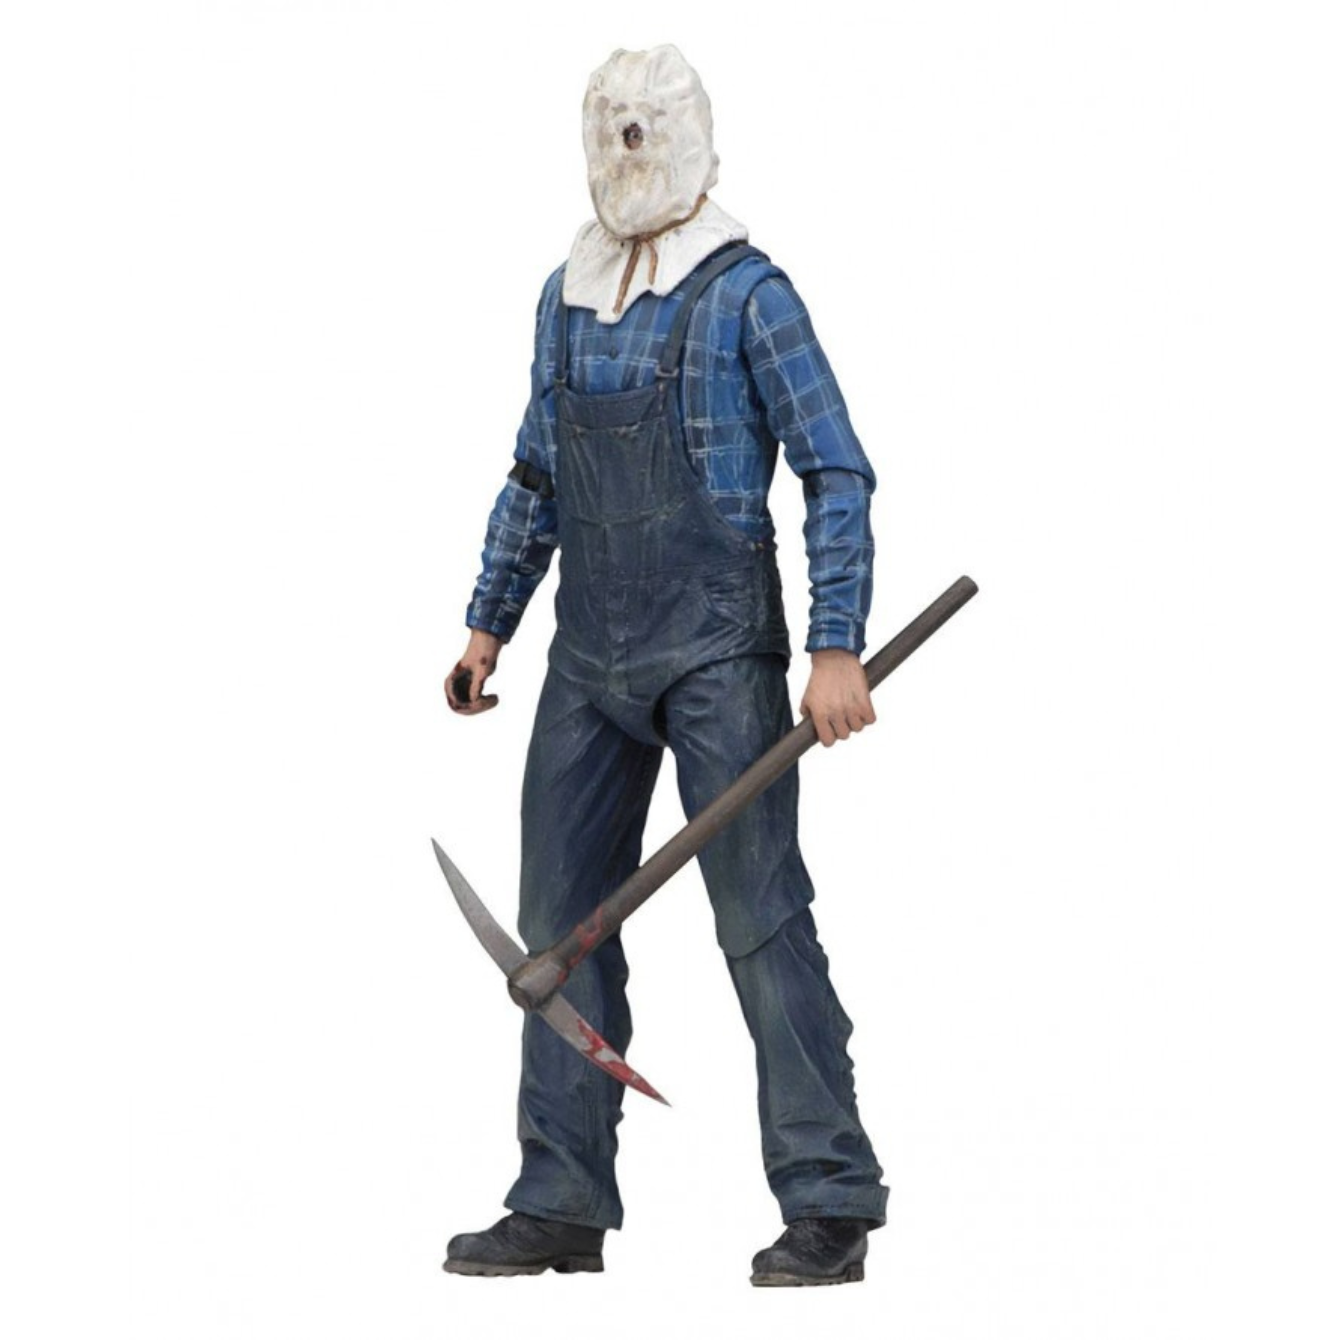 Friday the 13th Part 2: Neca Figure